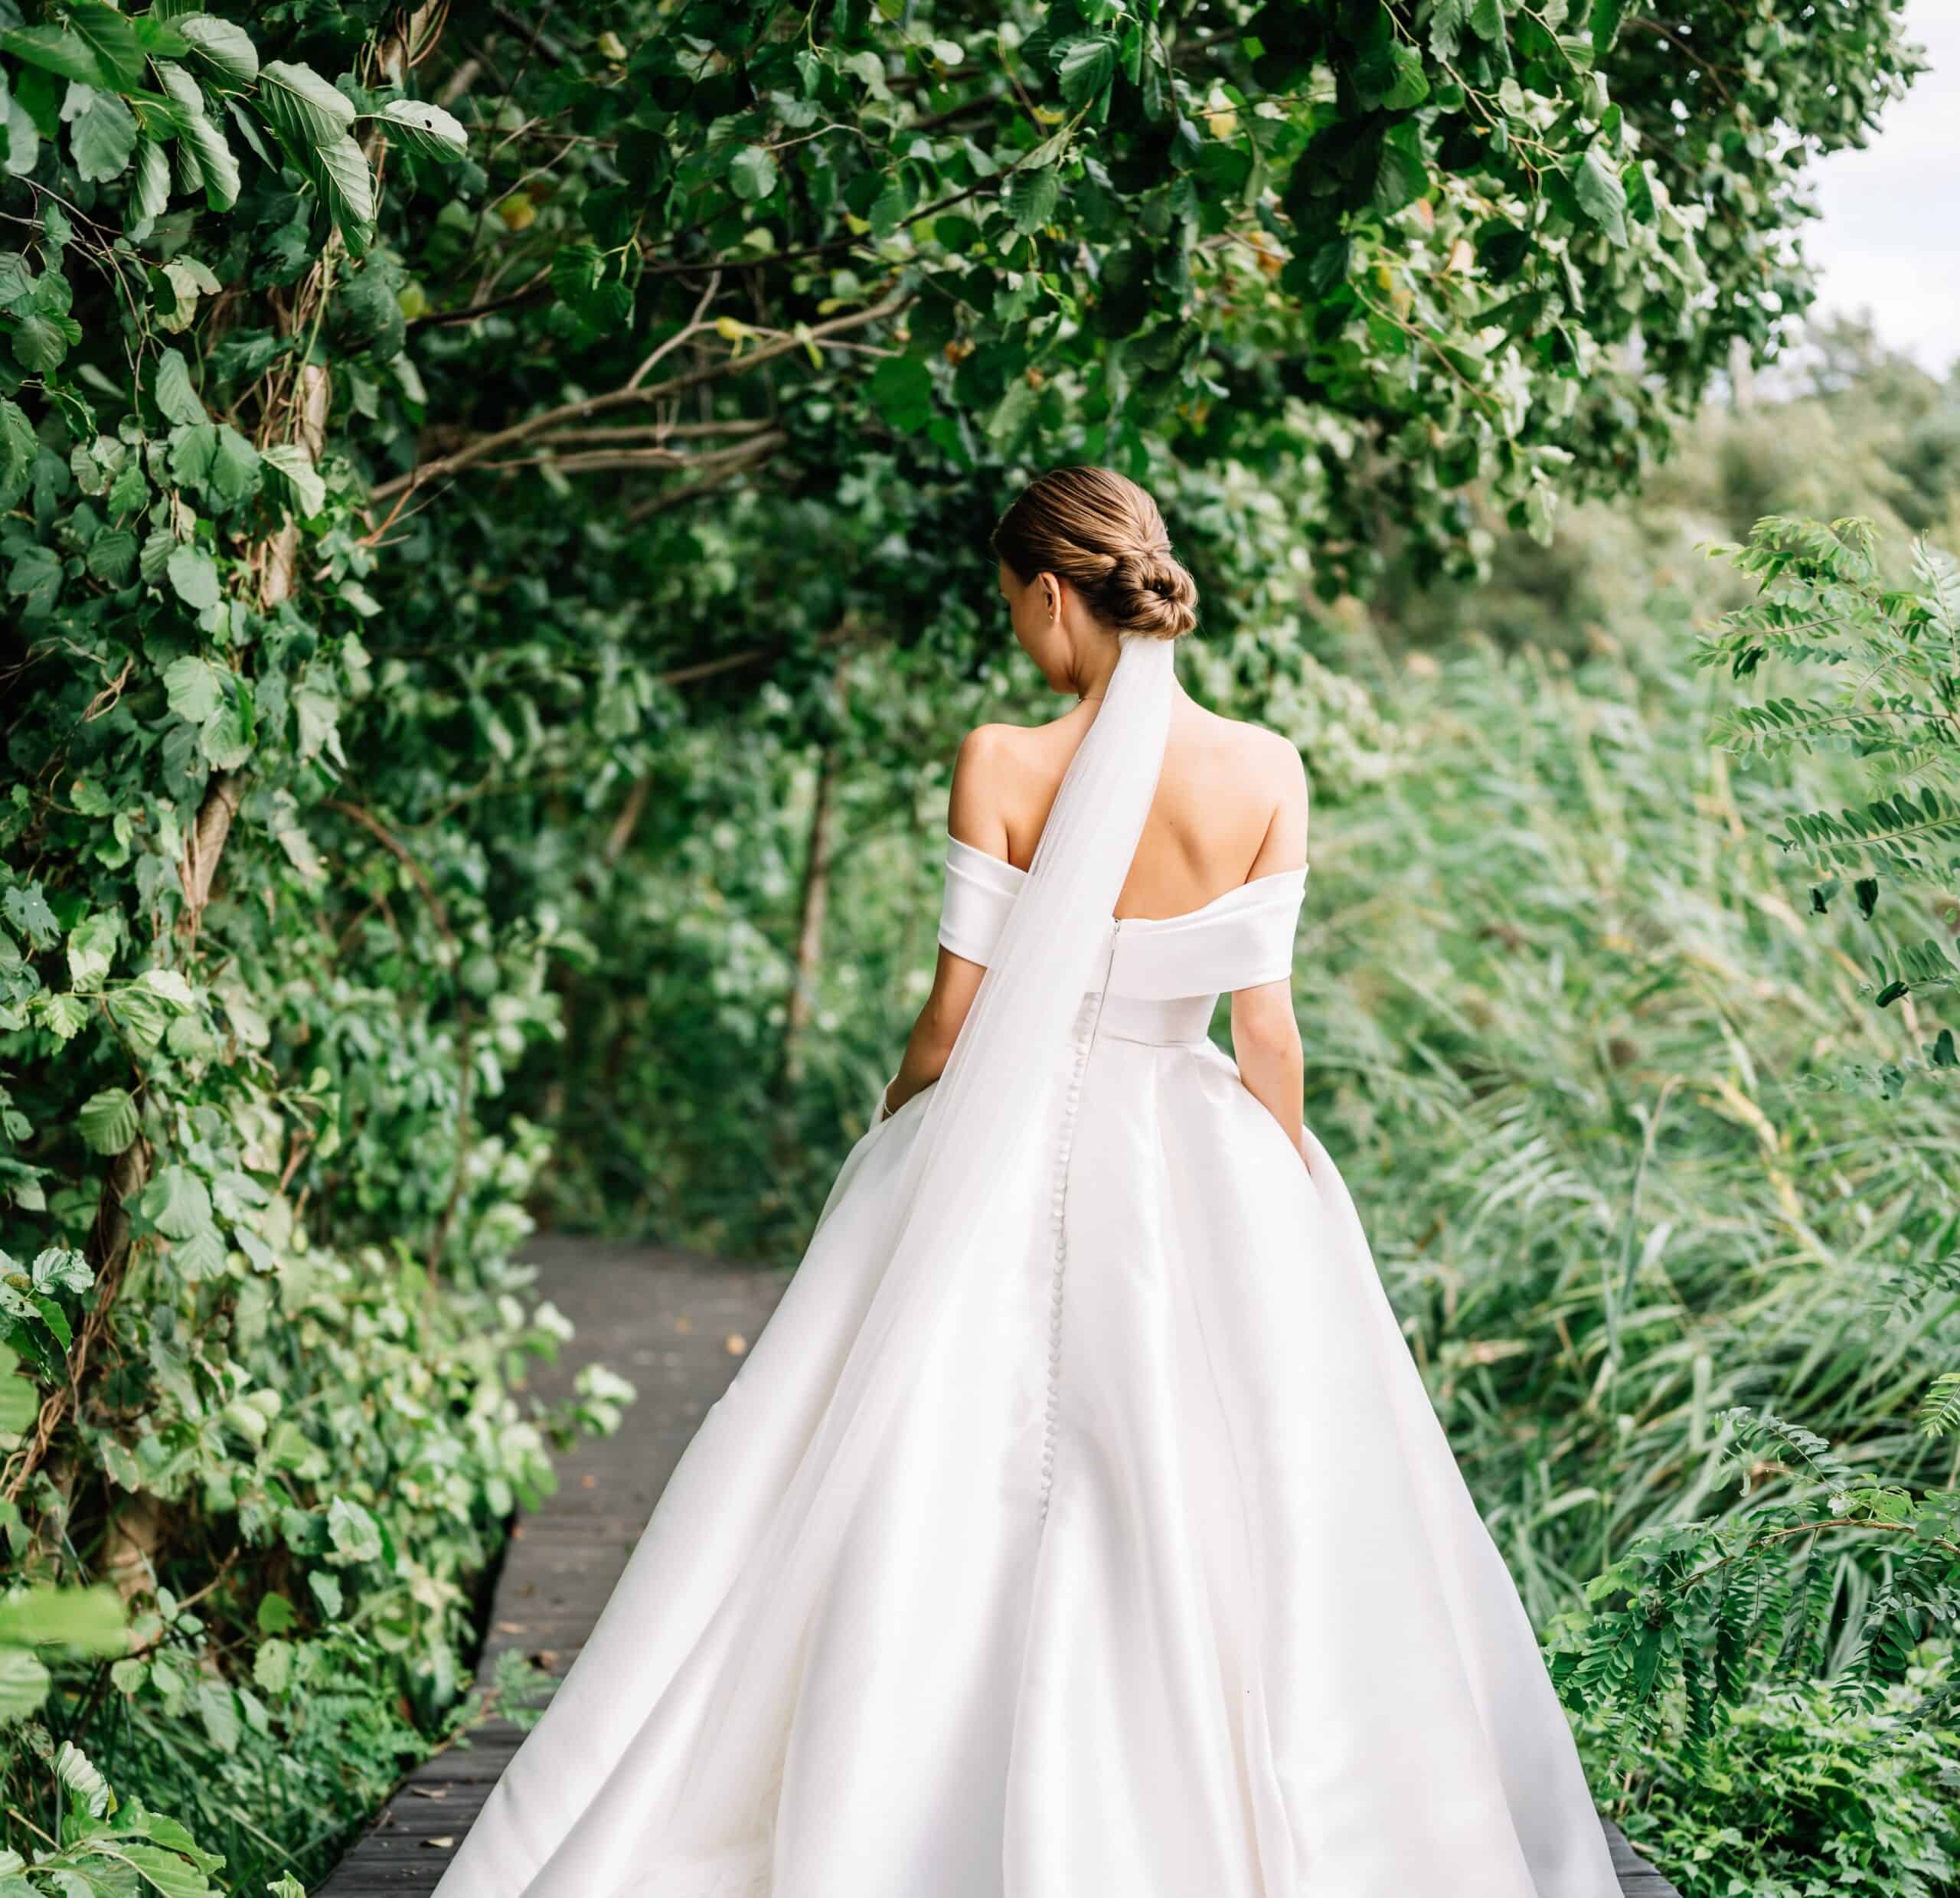 Why go sustainable with your wedding gown? 